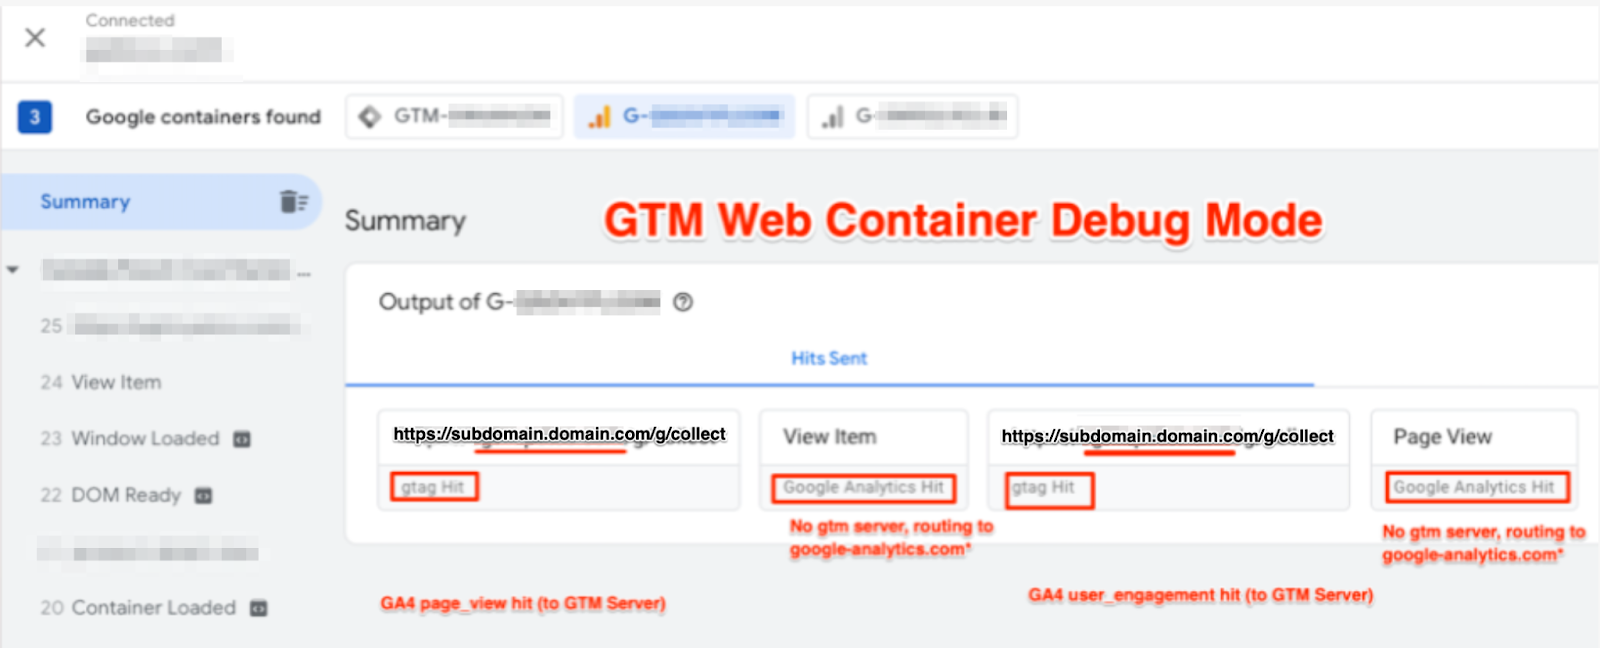 Example of GTM Web container debug mode screen